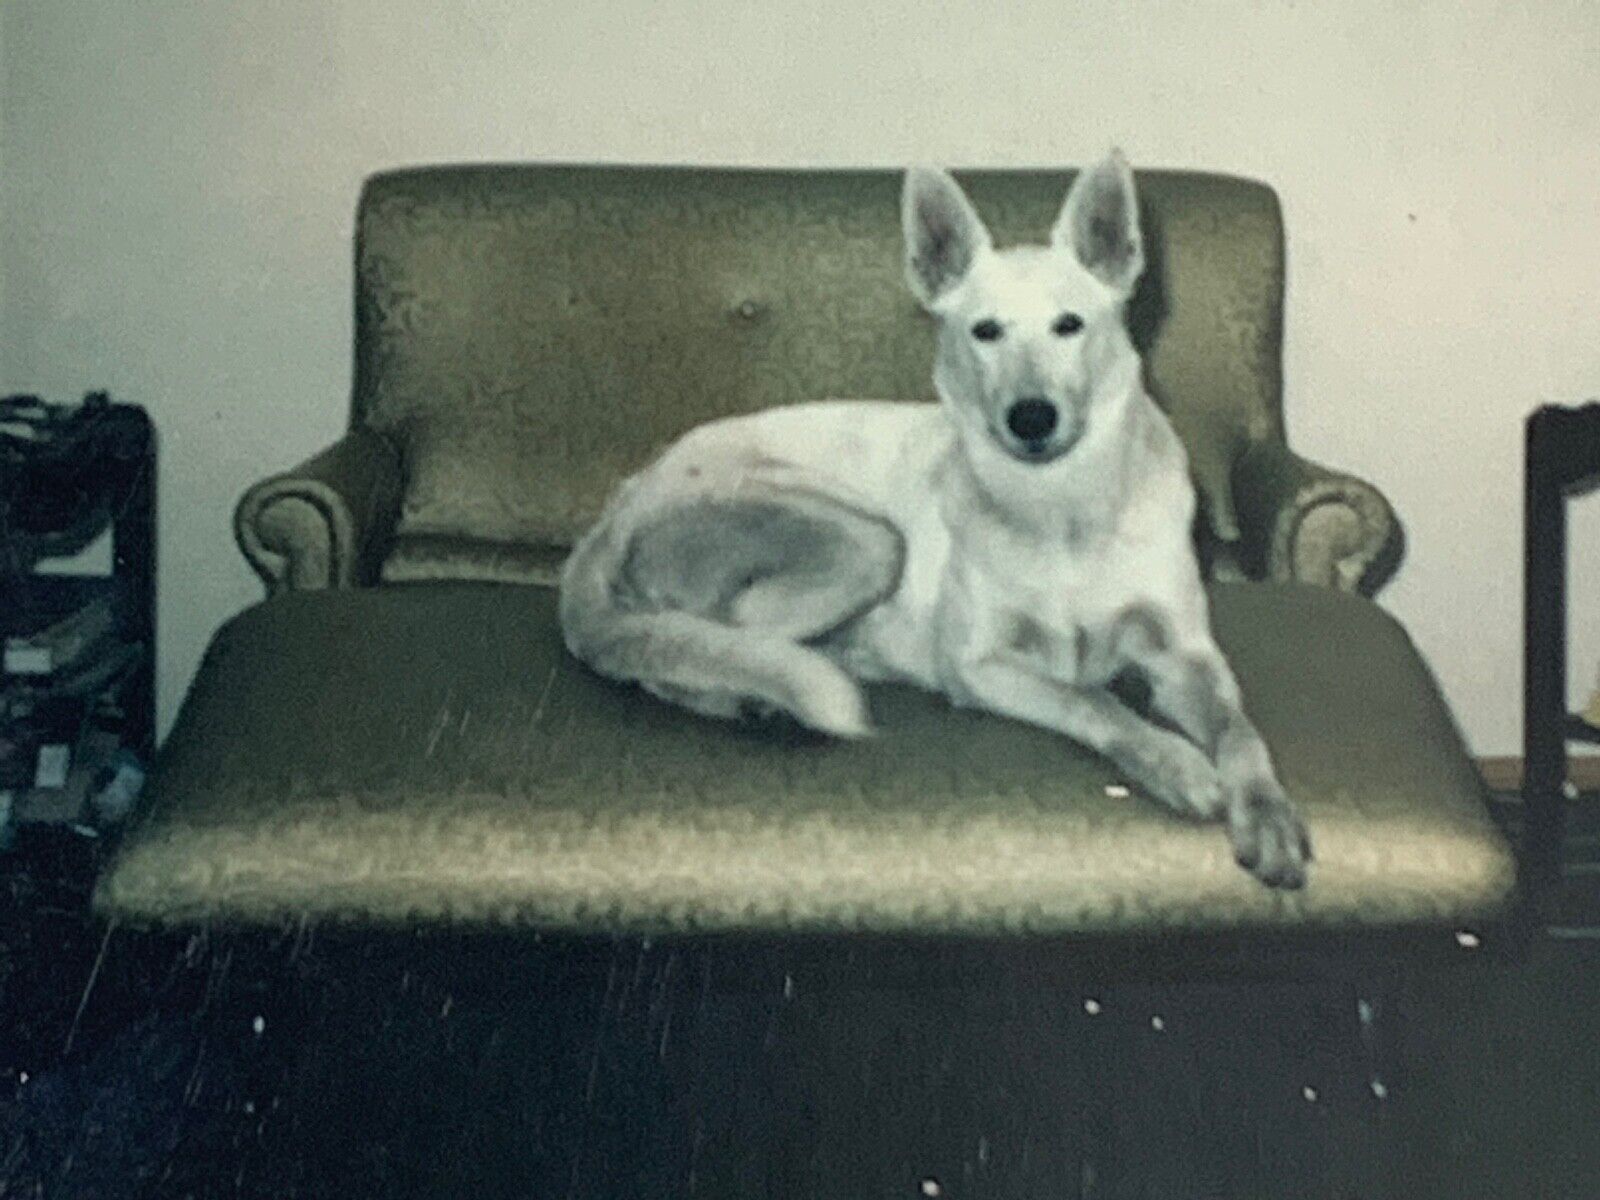 (AdC) Vintage FOUND PHOTO Photograph Snapshot Majestic Silver Dog On Chair